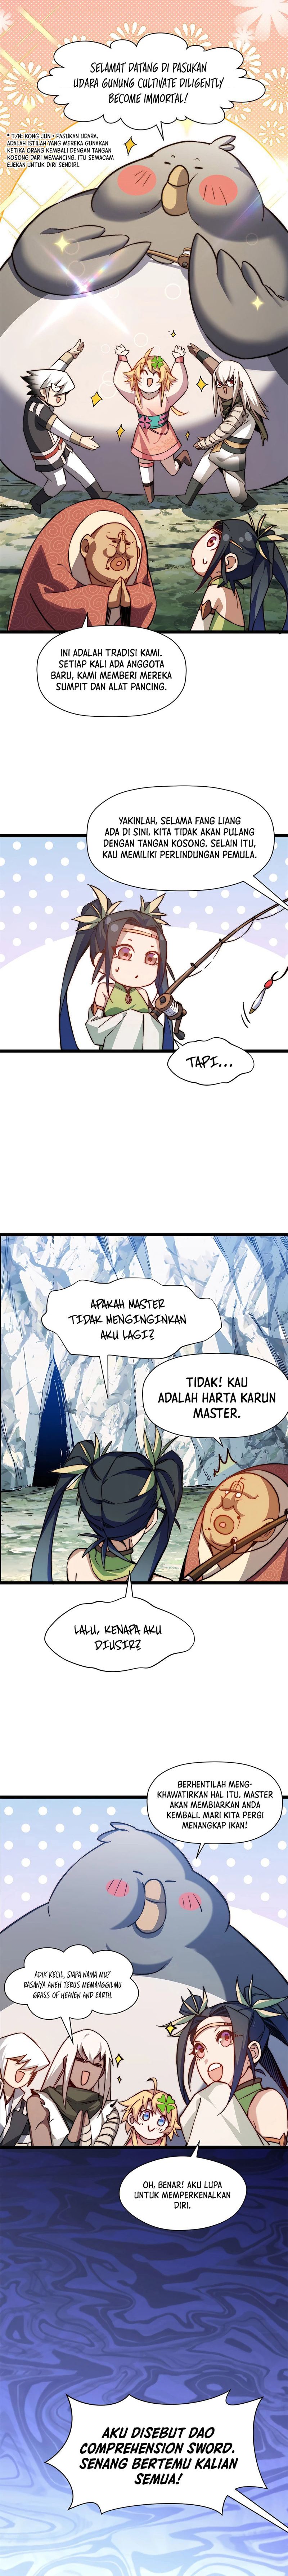 Dilarang COPAS - situs resmi www.mangacanblog.com - Komik top tier providence secretly cultivate for a thousand years 130 - chapter 130 131 Indonesia top tier providence secretly cultivate for a thousand years 130 - chapter 130 Terbaru 2|Baca Manga Komik Indonesia|Mangacan